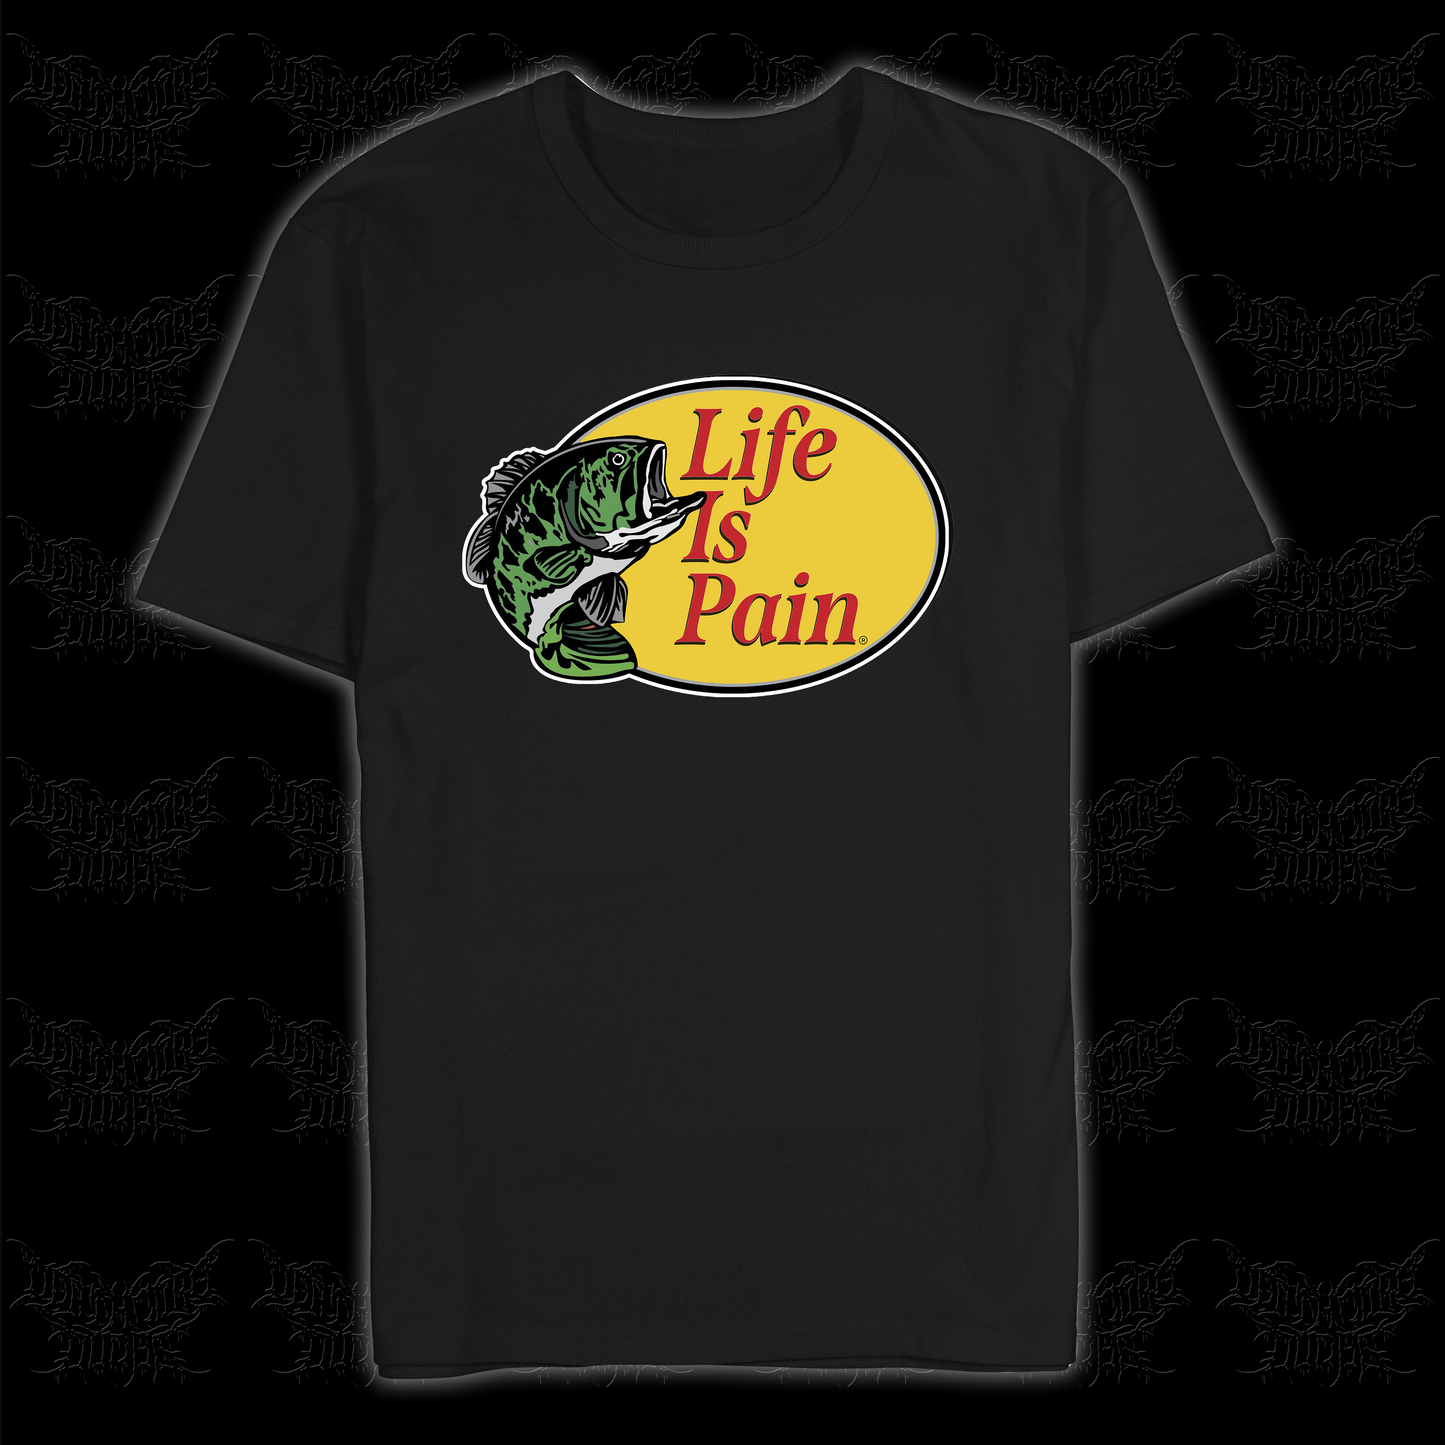 LIFE IS PAIN T-Shirt